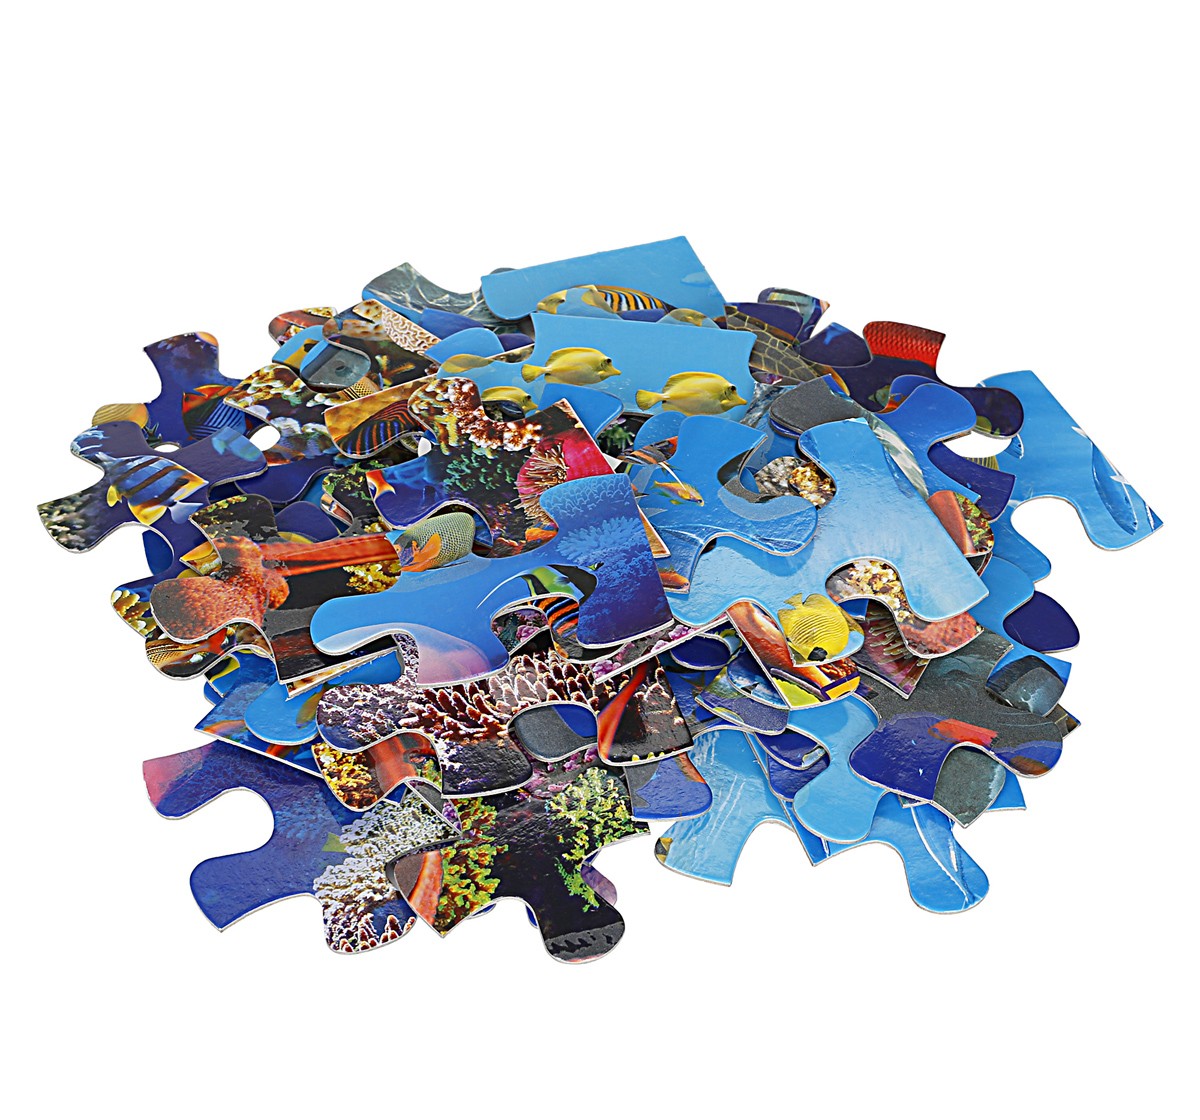 Glow In The Dark 100 Piece Puzzle - 4 Pack - Sports Unlimited